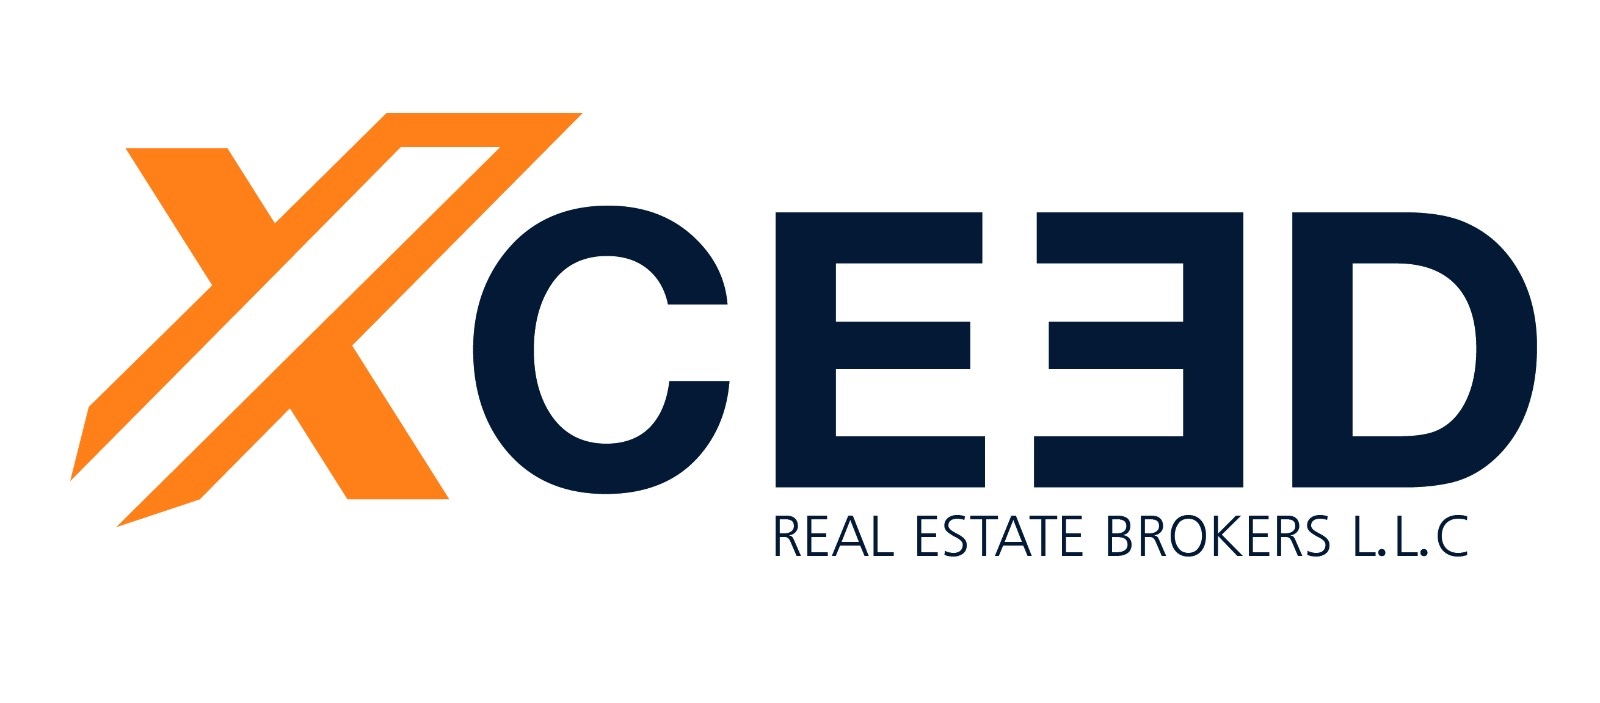 Xceed Real Estate